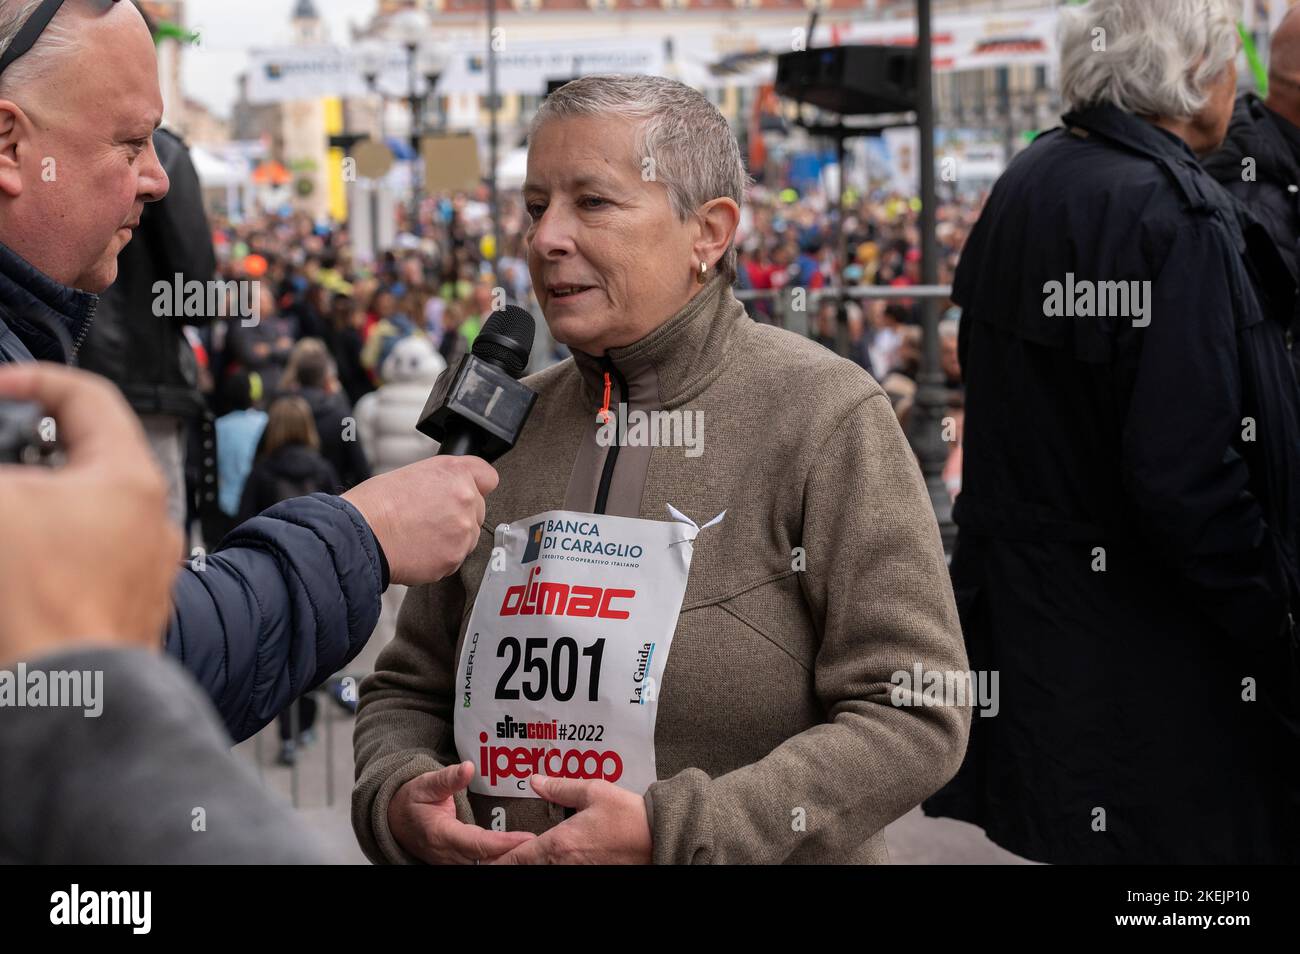 Cuneo, Italy. 13 November 2022. The mayor of Cuneo, Patrizia Manassero, during an interview made on the stage before the start of the Cuneo Marathon. Credit: Luca Prestia / Alamy Live News Stock Photo